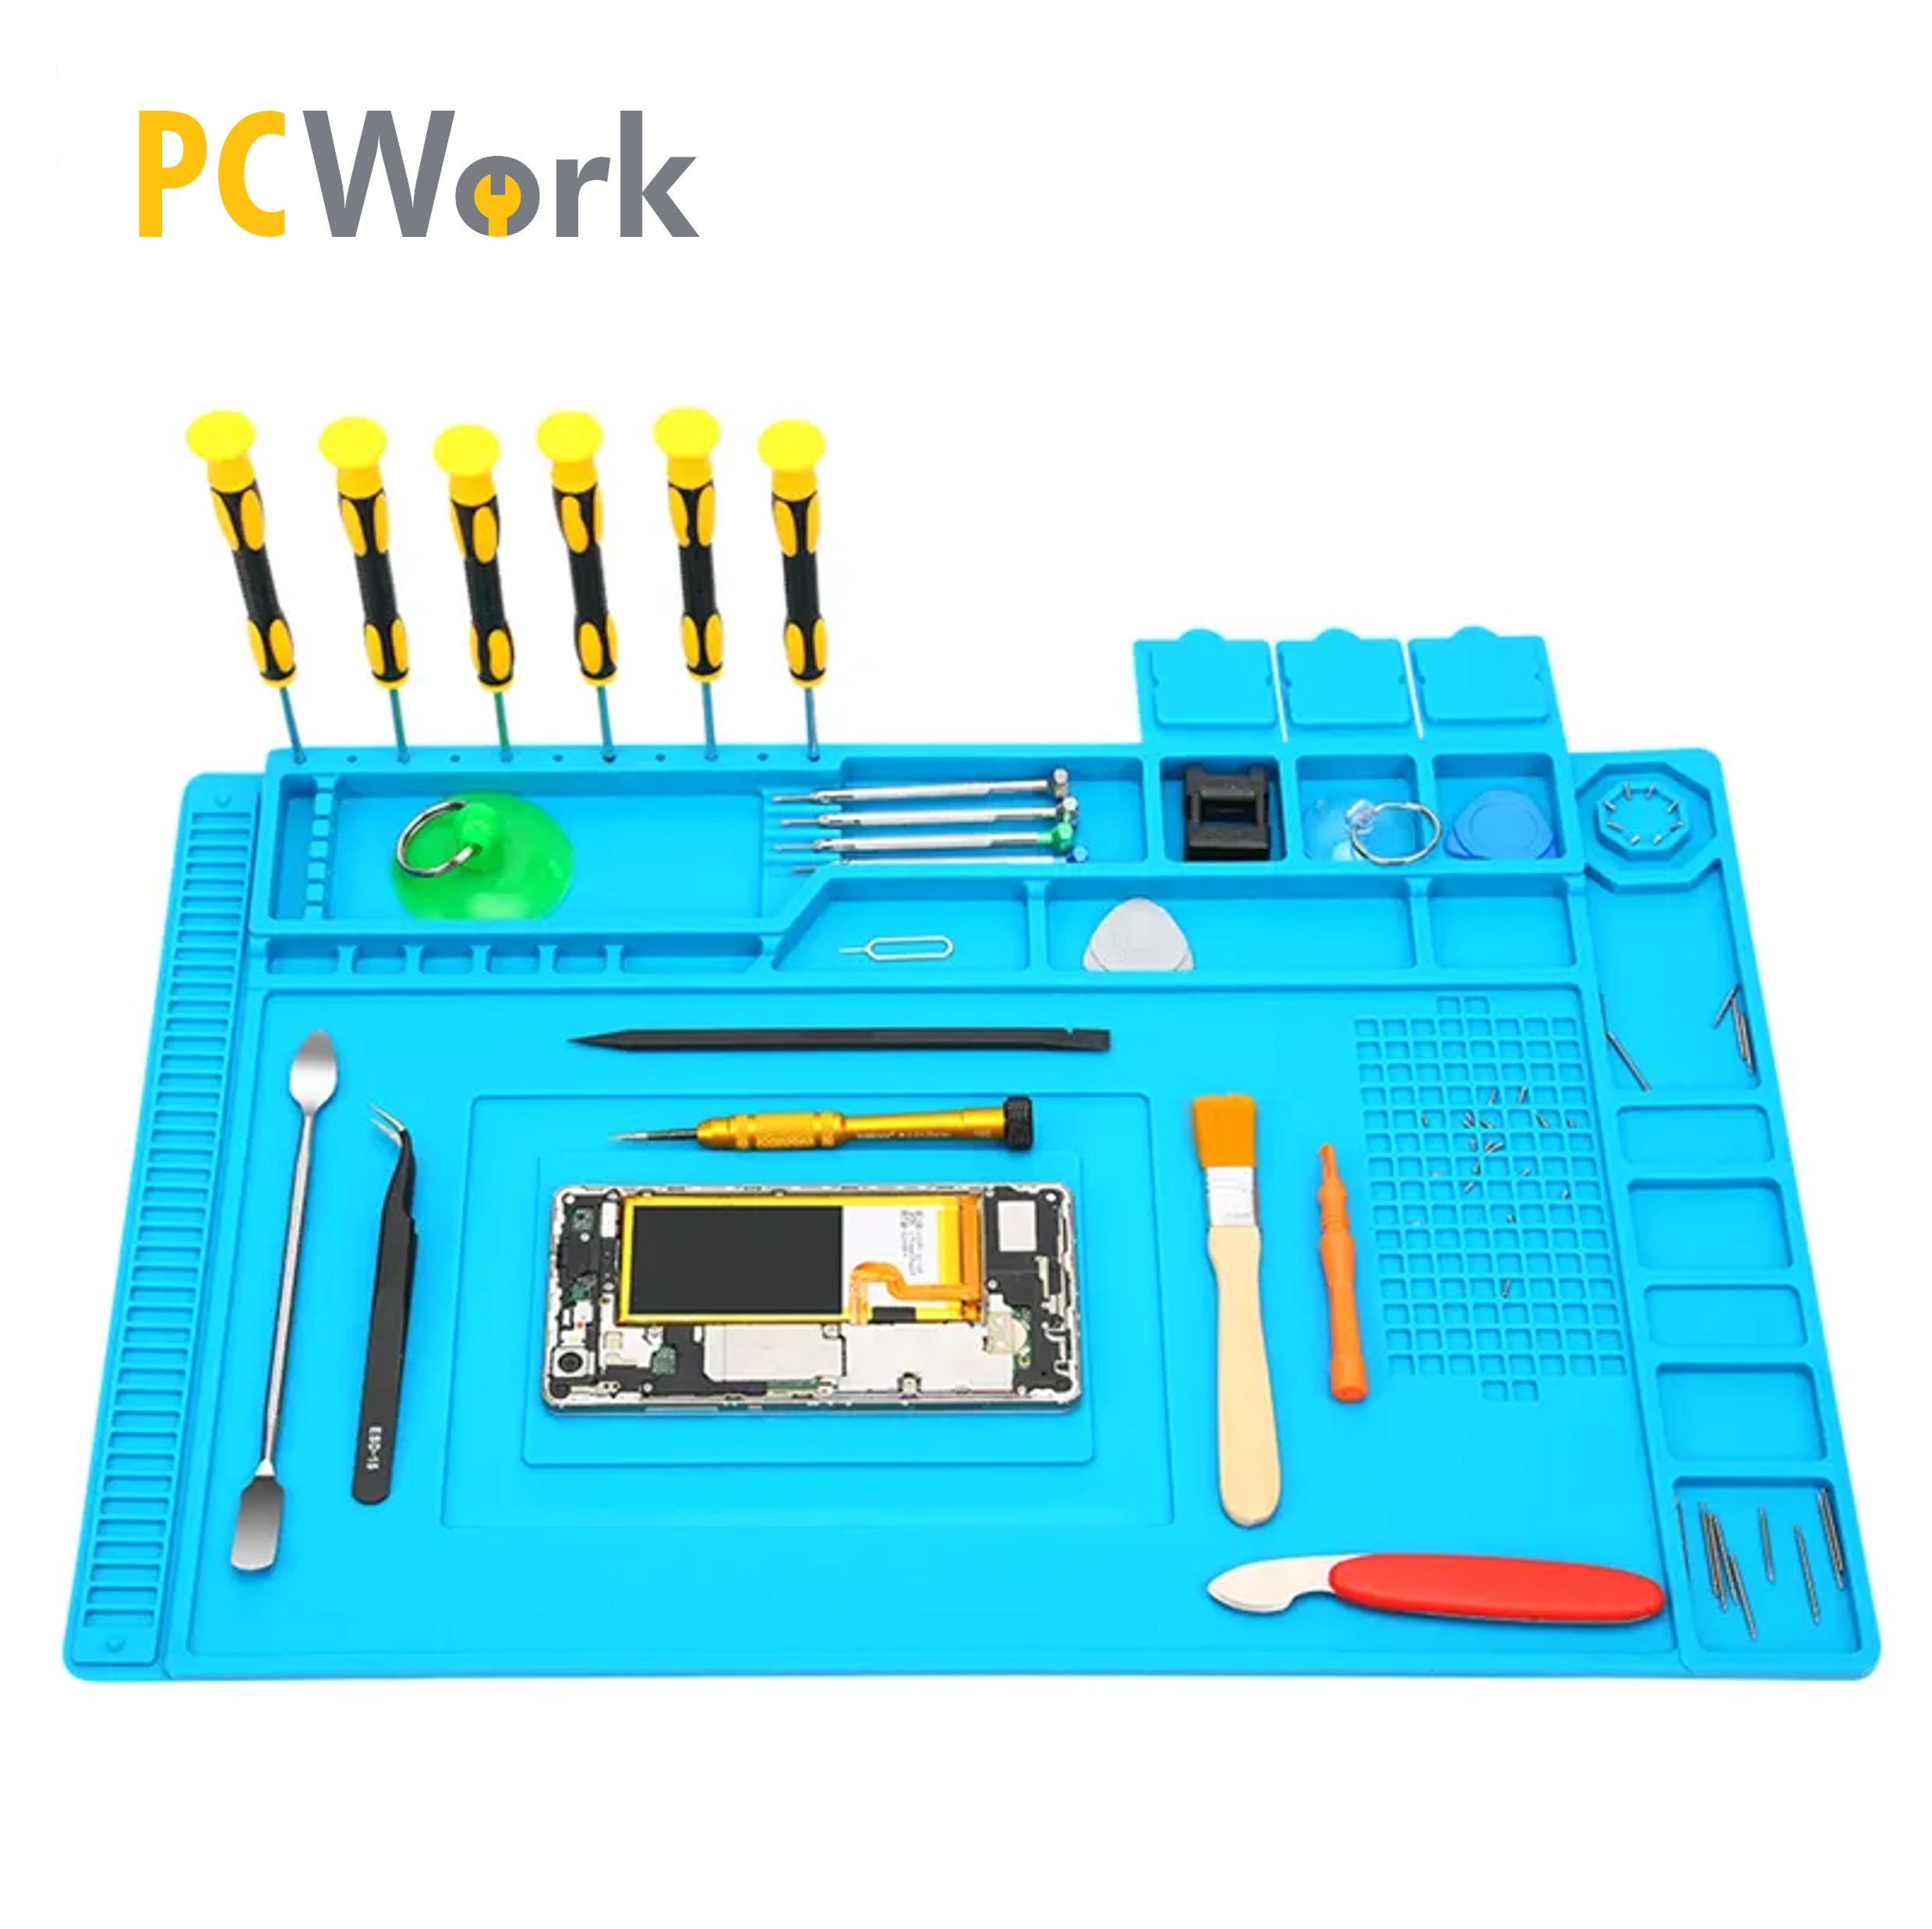 PCW10A Soldering mat 450x300mm with storage boxes, magnetic, silicone